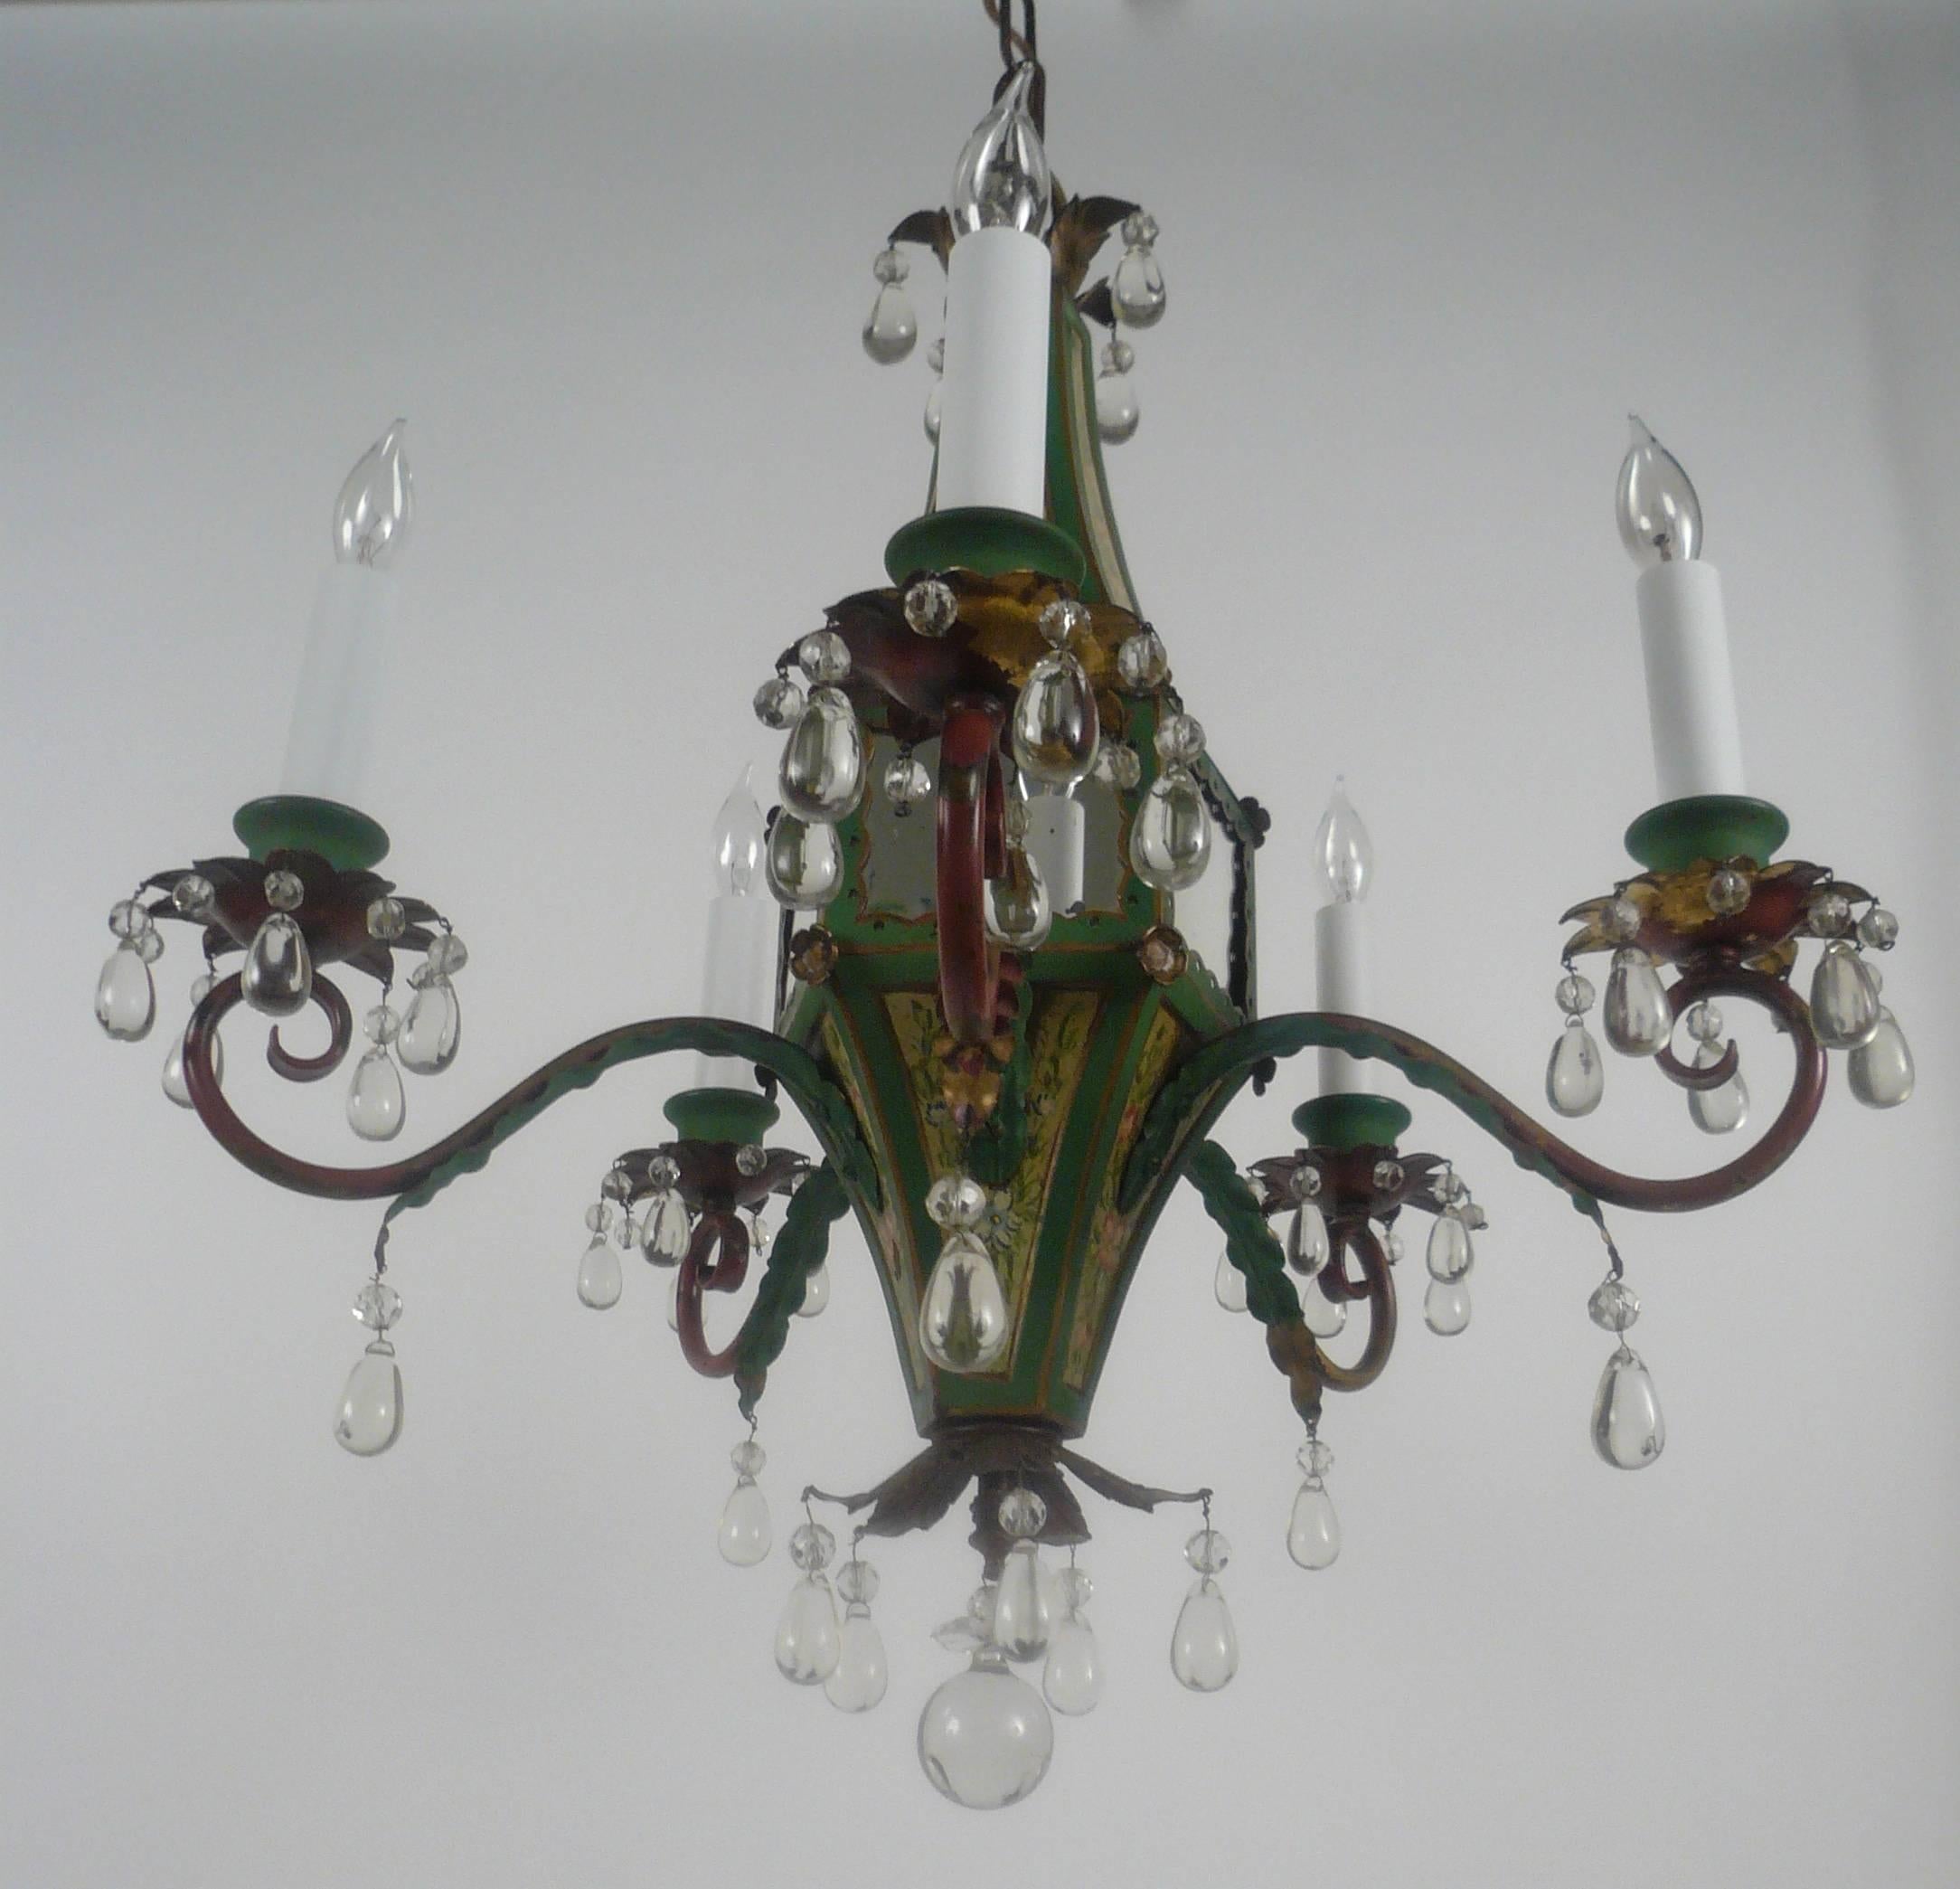 This whimsical Regency Brighton Pavilion style floral painted tole, mirror, and crystal chandelier is attributed to E. F. Caldwell, and is pictured in their archives.